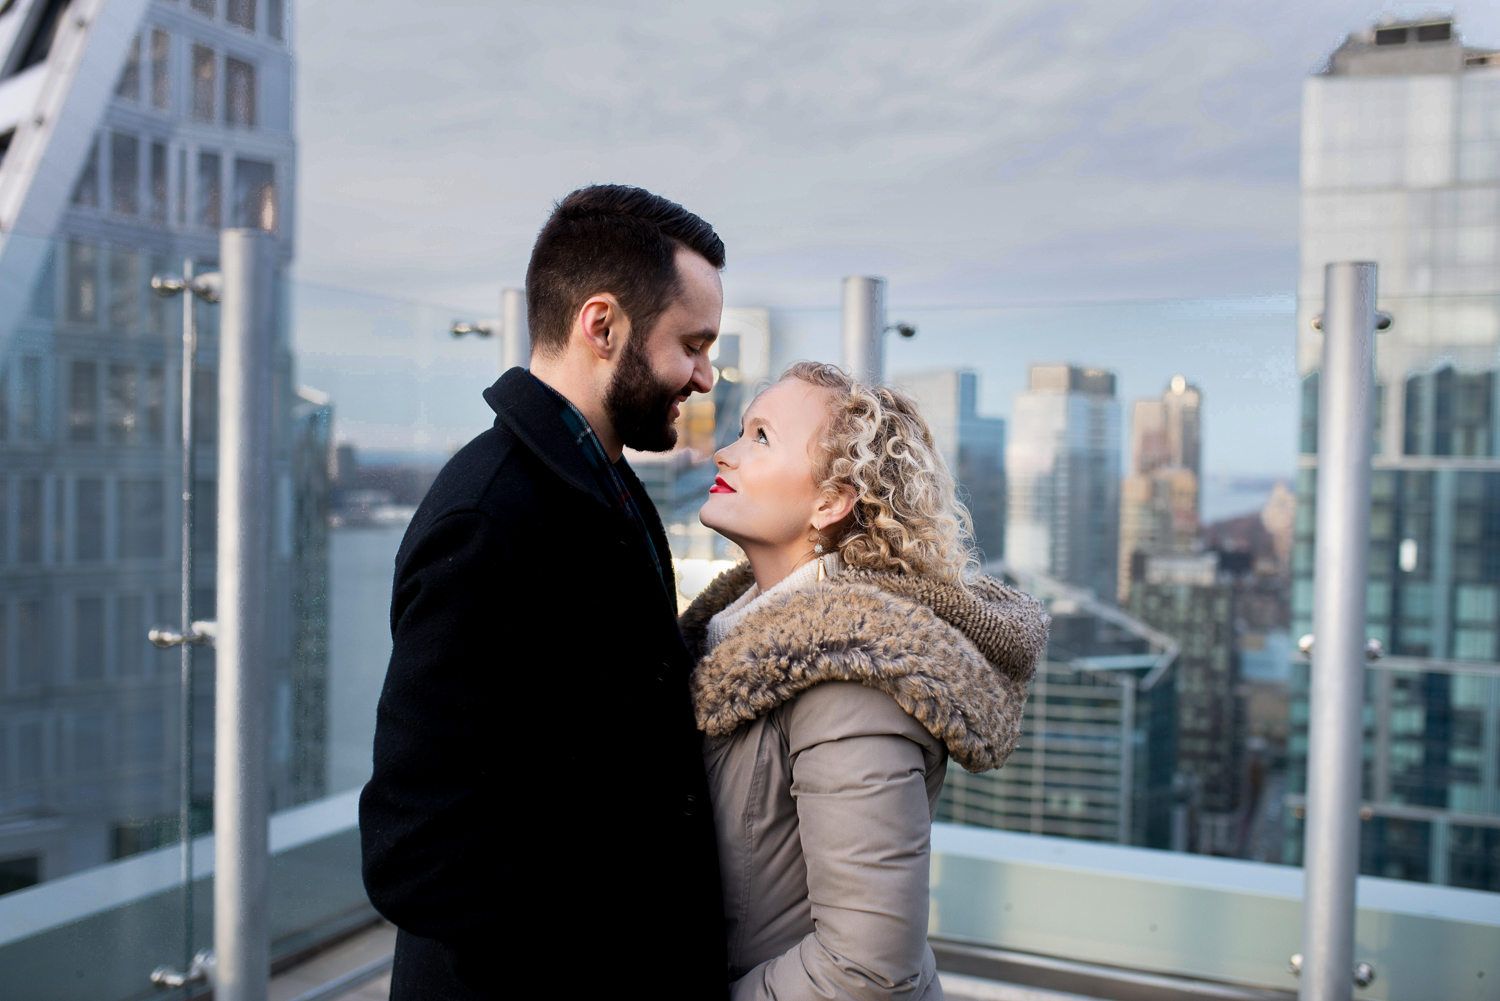 Amanda Jane Cooper, recently seen as Glinda in Wicked, gets engaged in New York City. Photo by ALN IMAGES